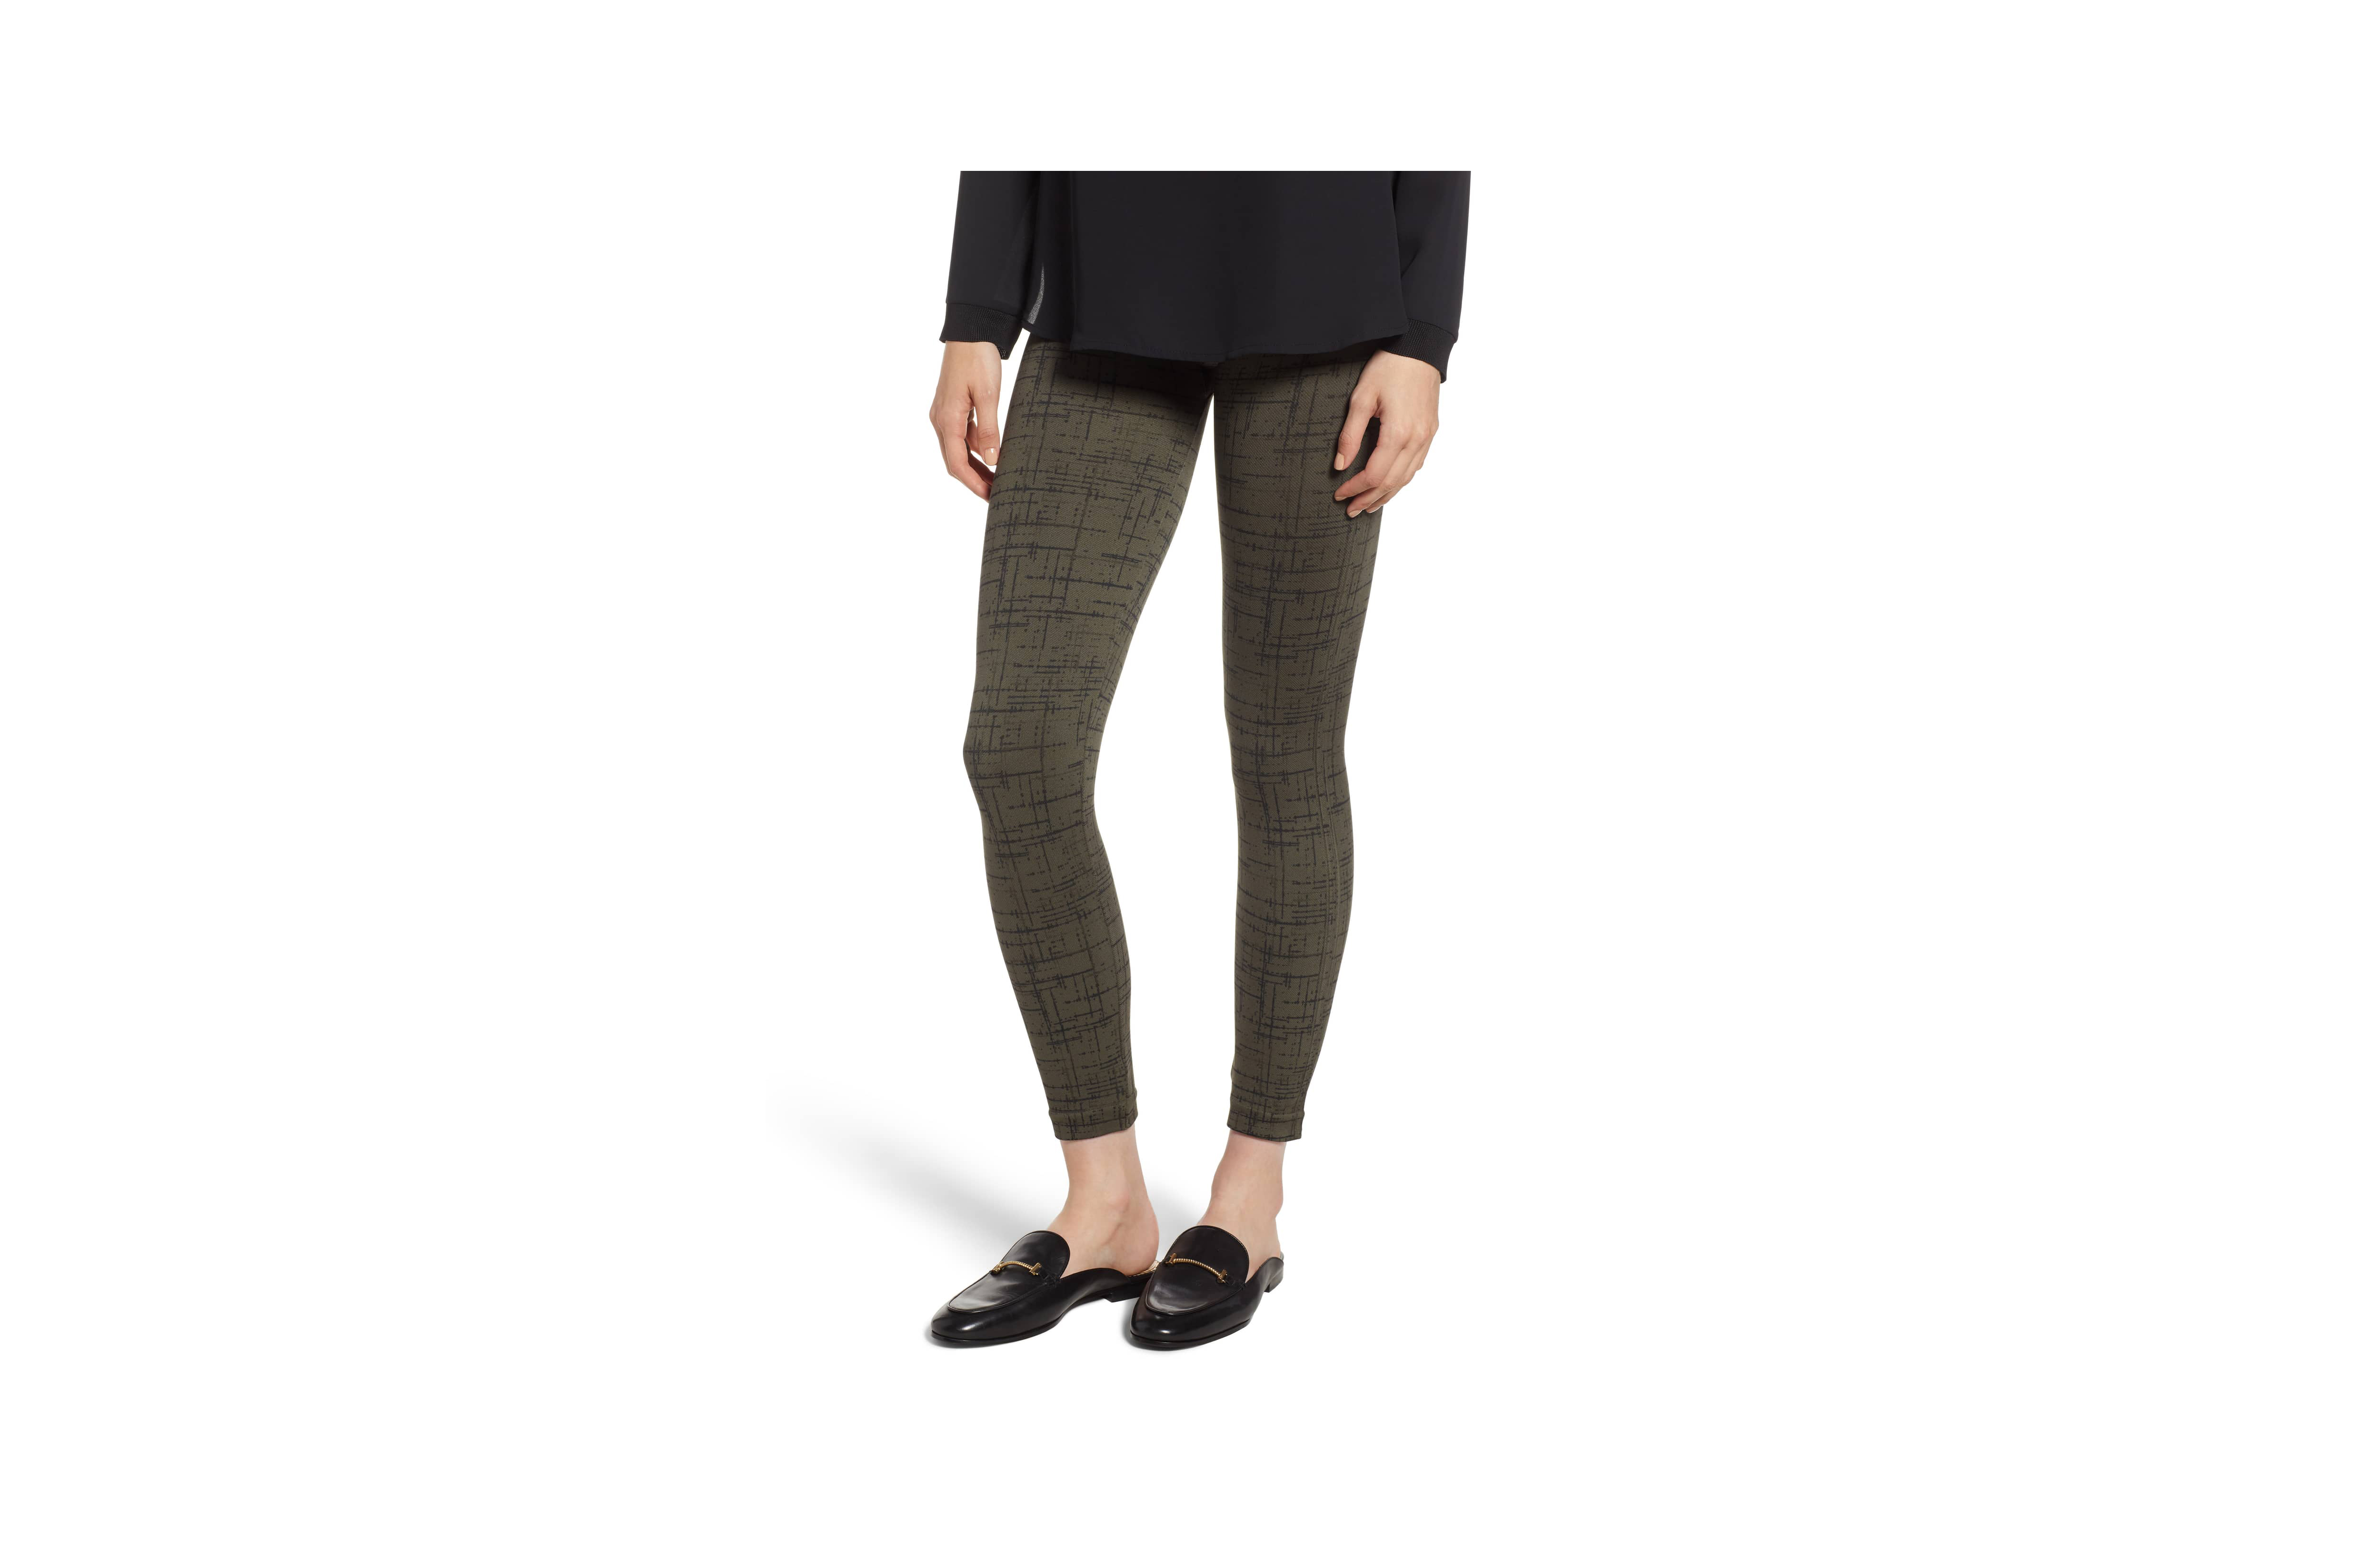 These Flattering Spanx Leggings Will Have All Eyes on You